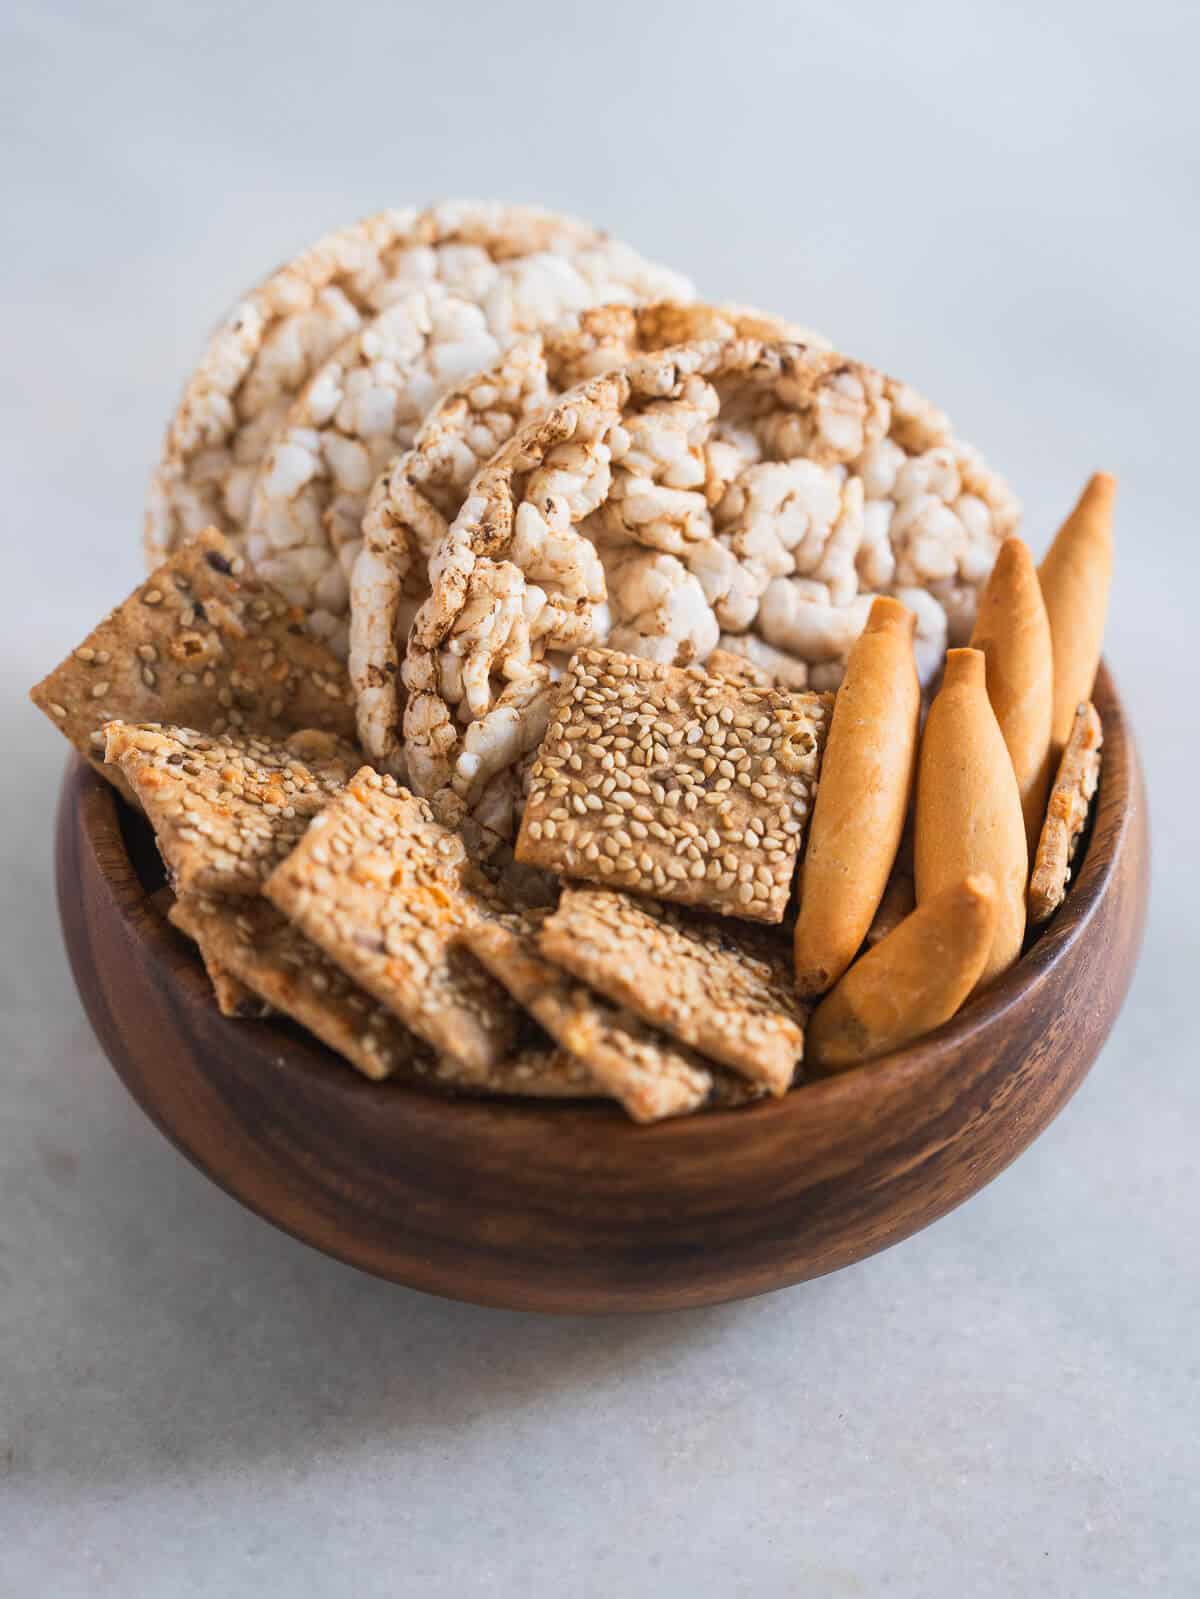 crackers and rice cakes in a bowl.